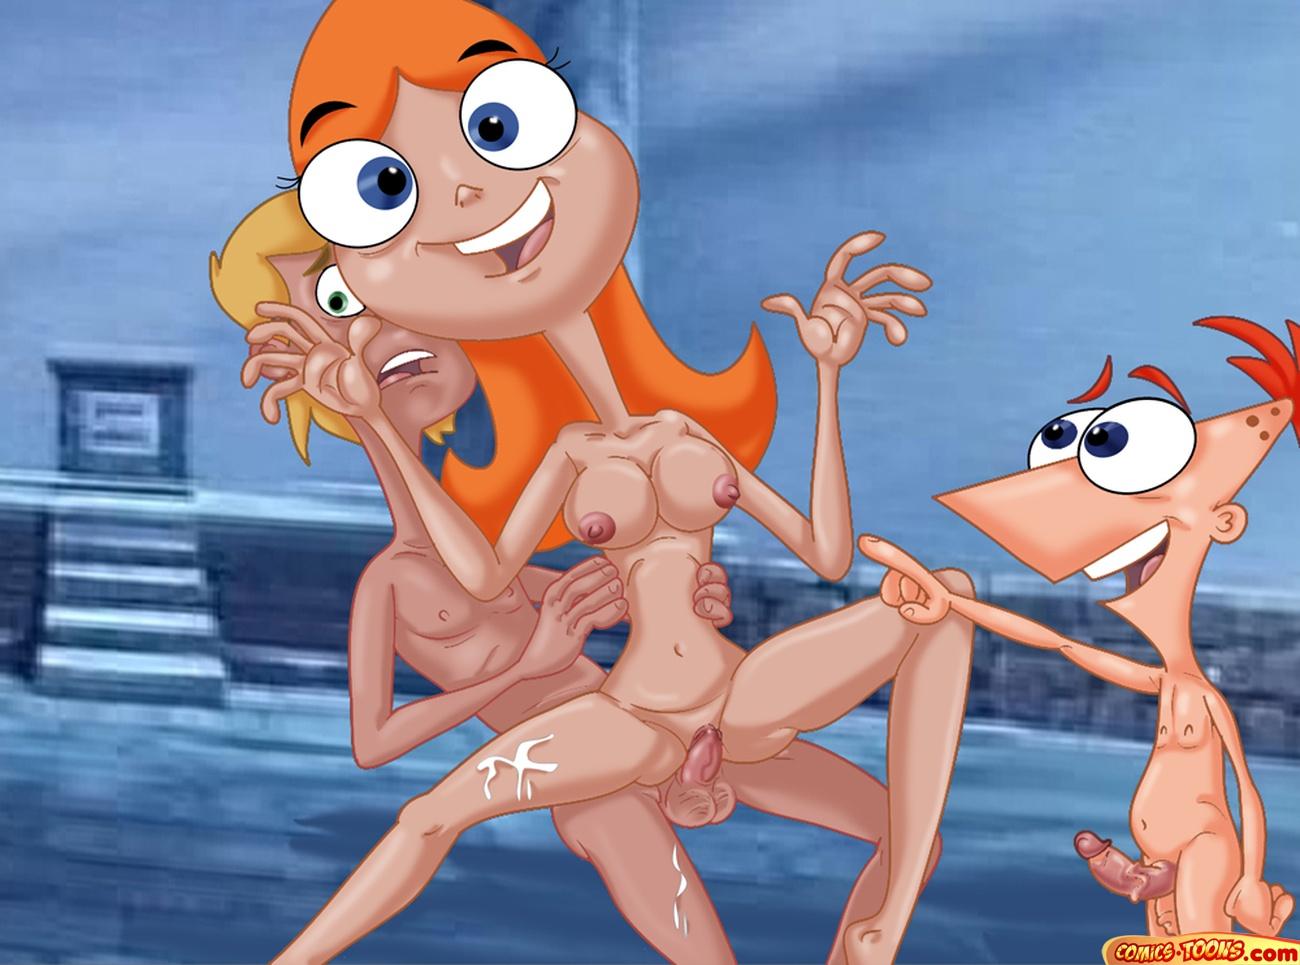 candace phineas and xxx ferb Five nights at freddy's 1 chica